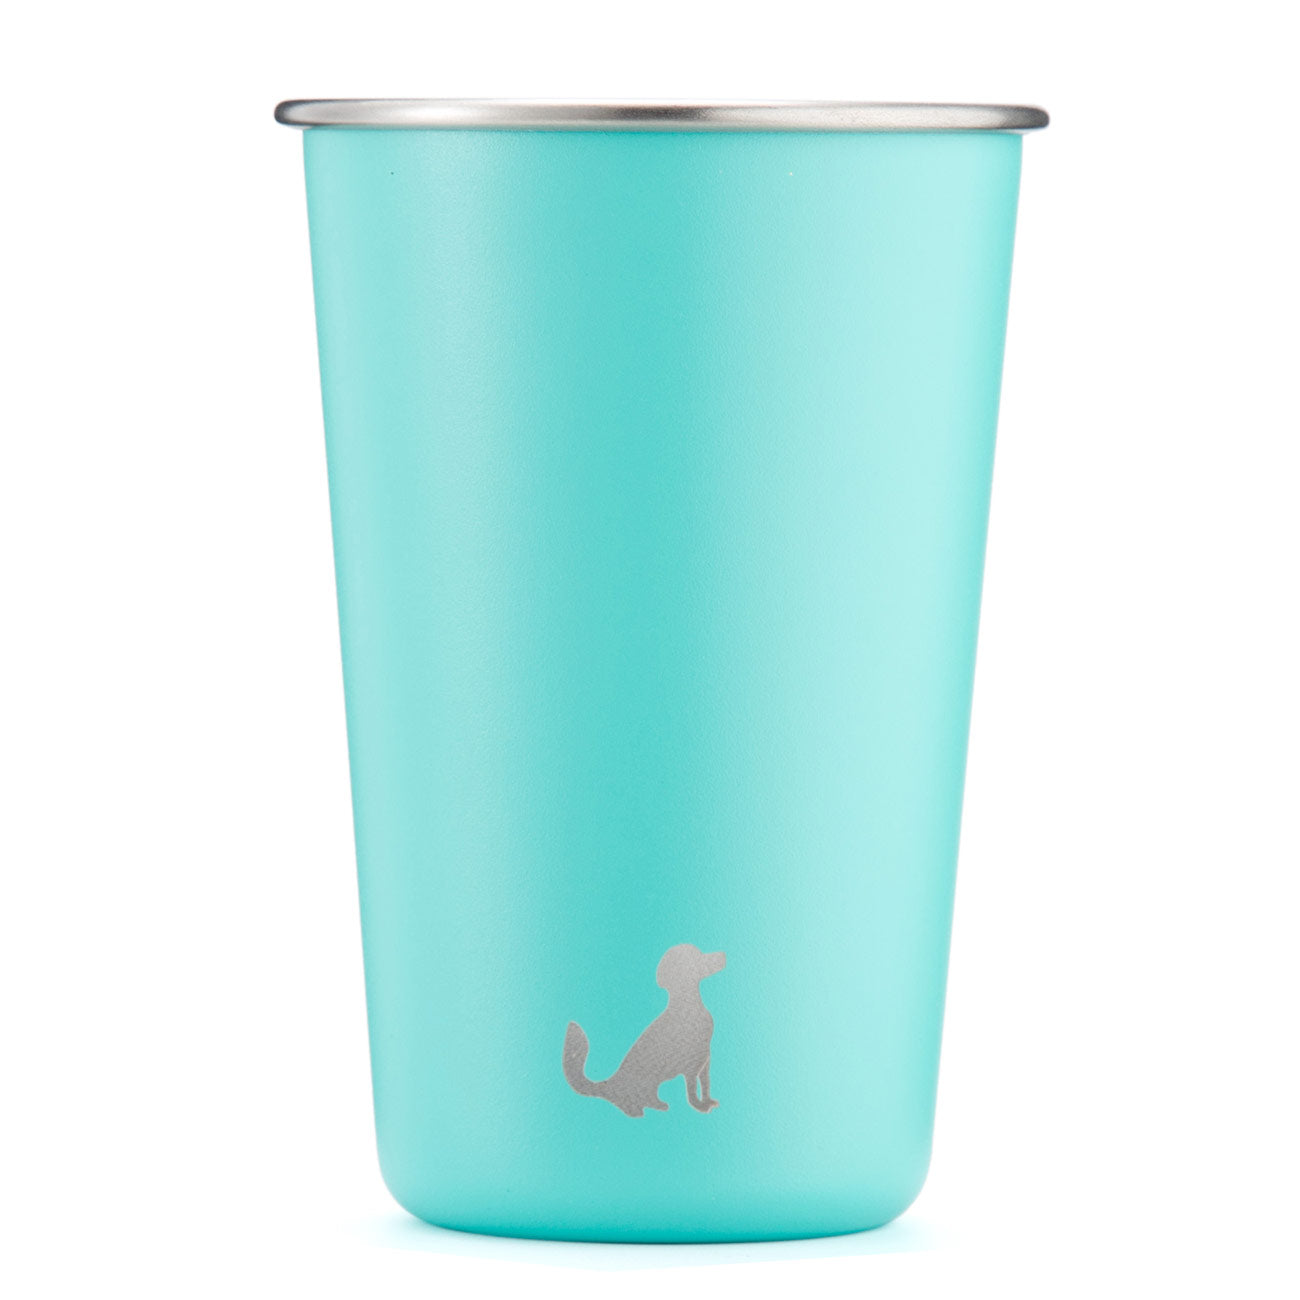 SWIZZLE CUP – STAINLESS STEEL / 14oz (414ml) – Cocktail Kingdom